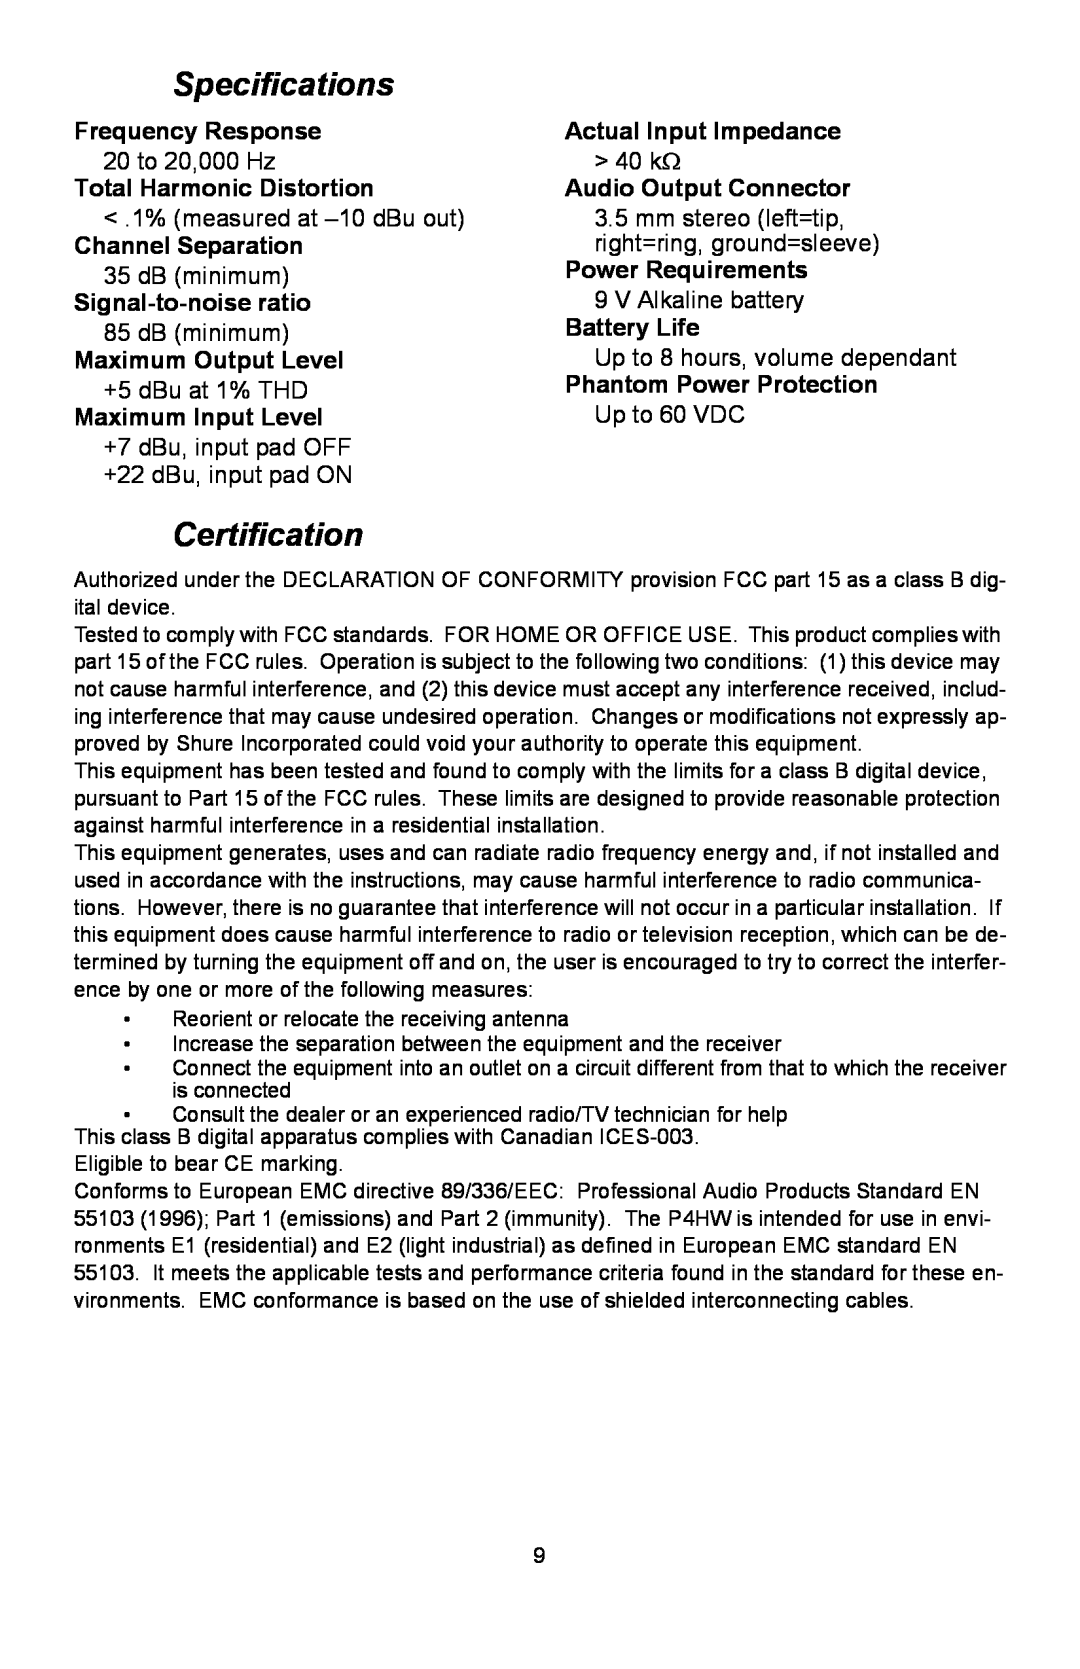 Shure P4HW manual Specifications, Certification 